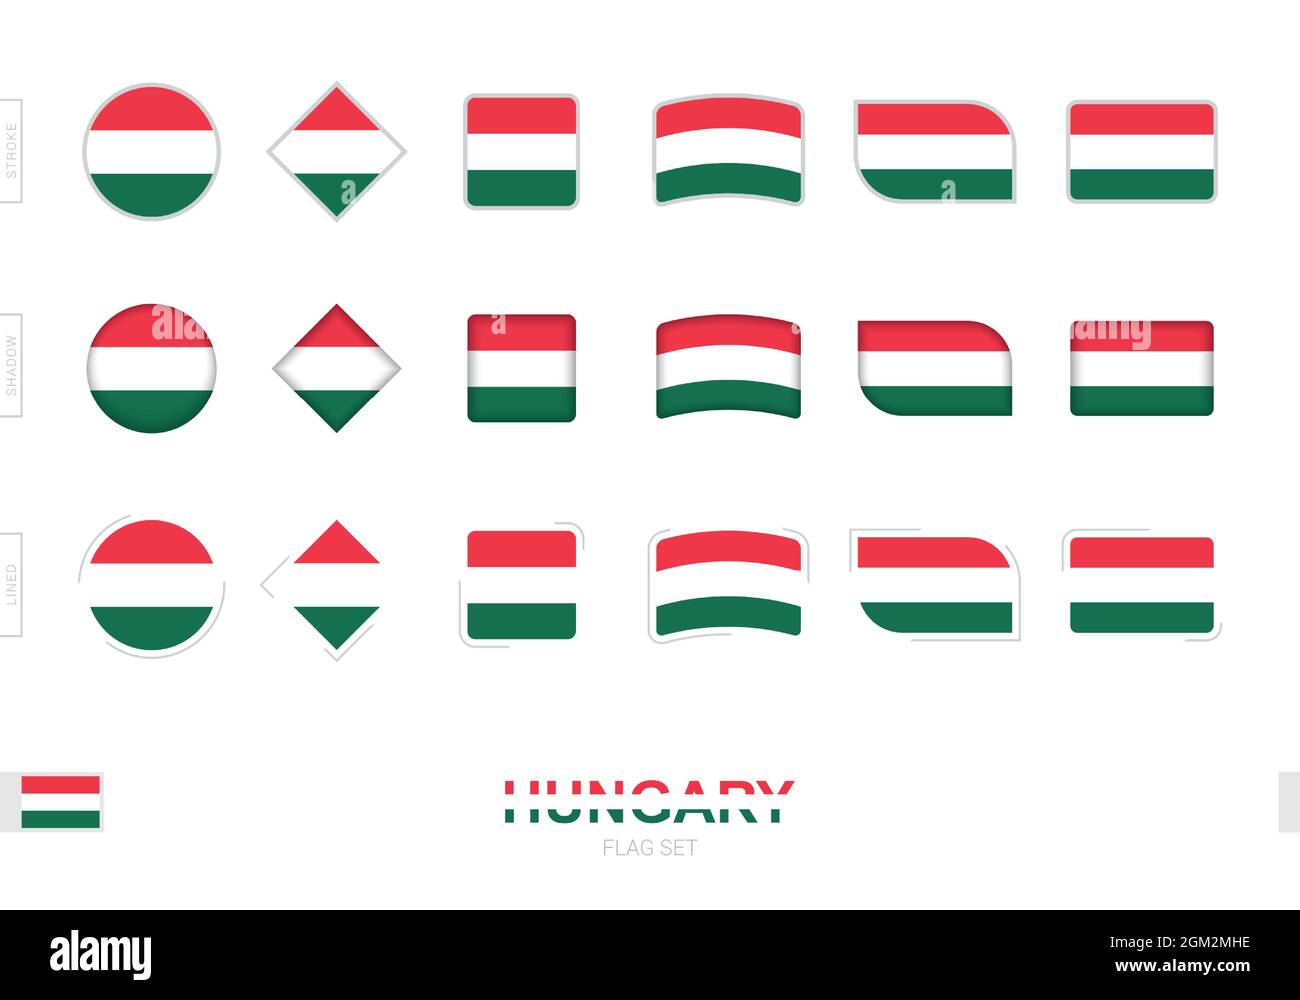 Hungary flag set, simple flags of Hungary with three different effects. Vector illustration. Stock Vector